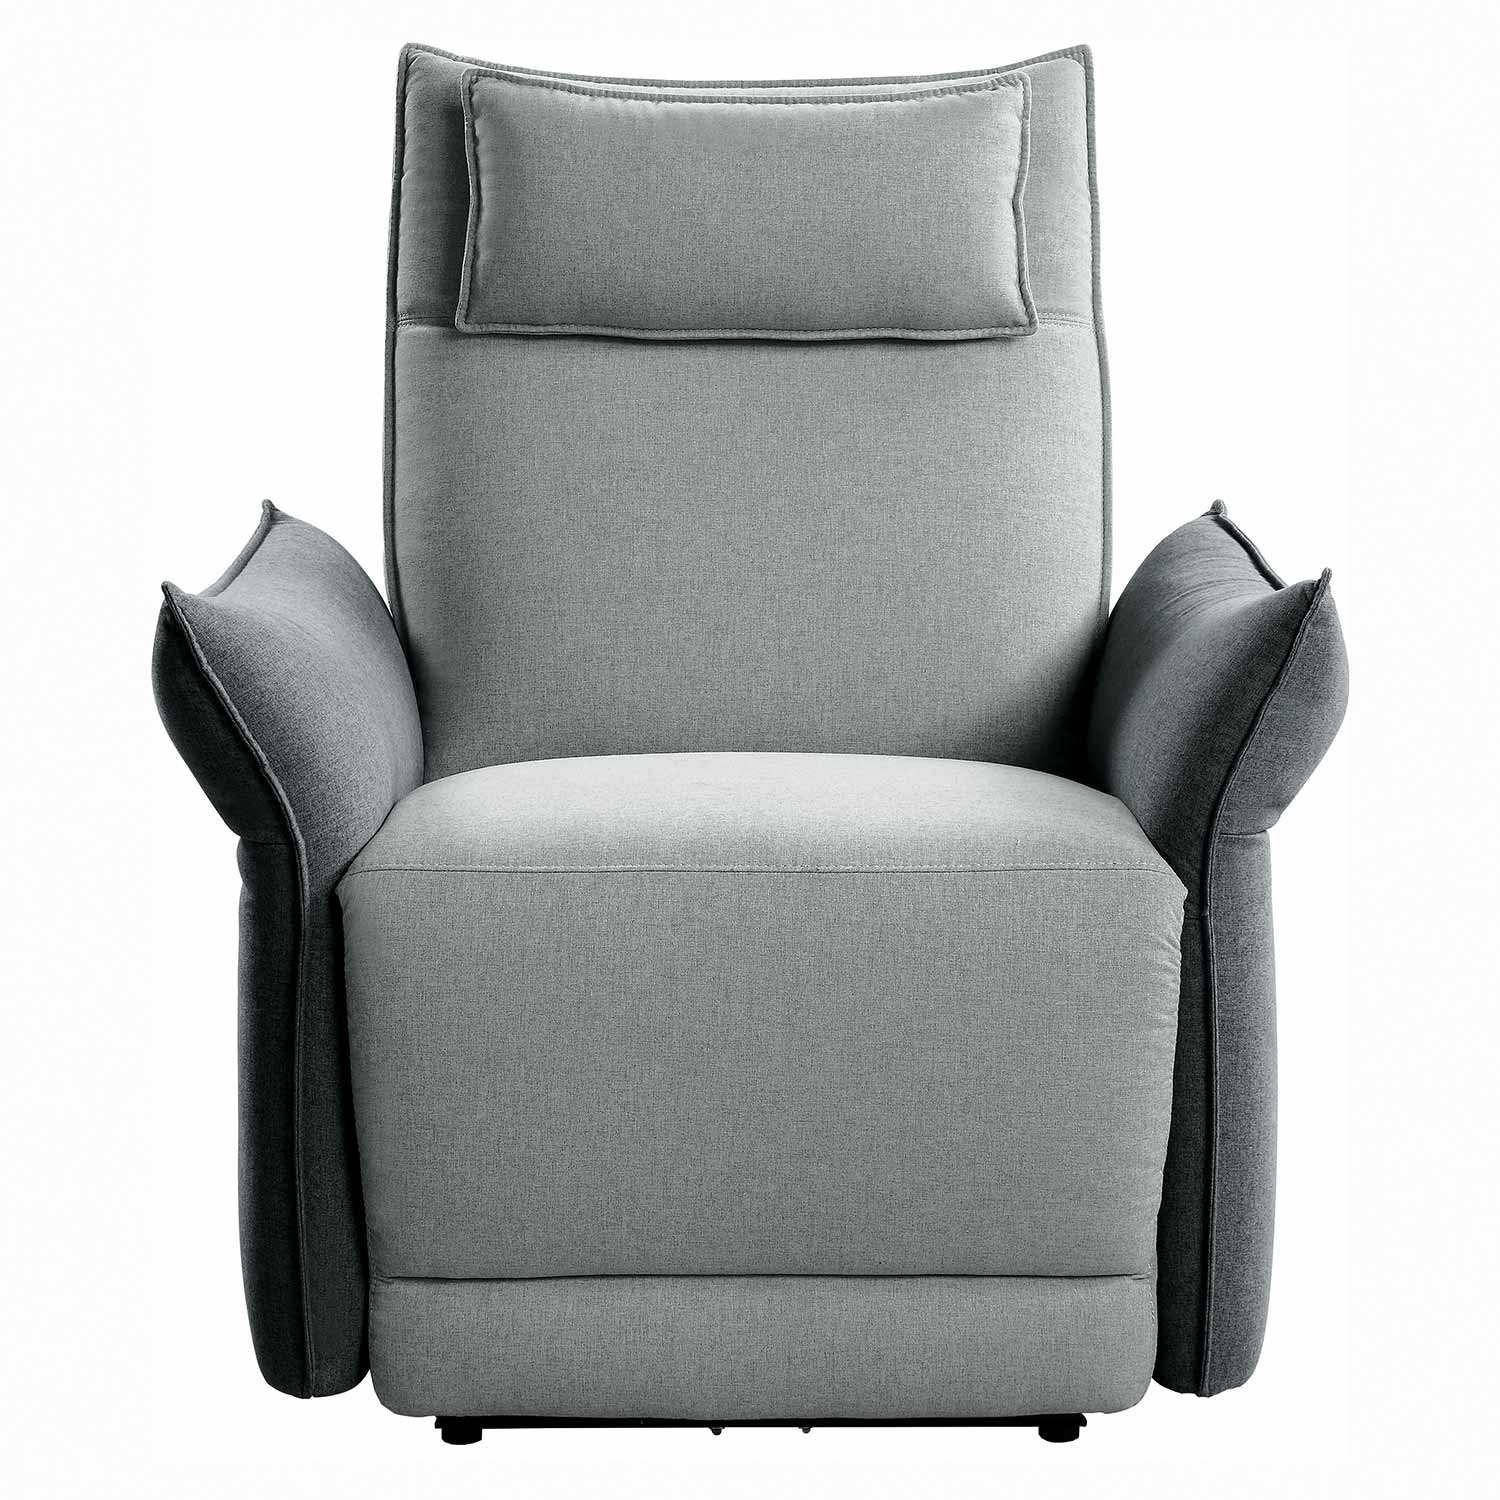 Homelegance Linette Power Reclining Chair with Power Headrest - Gray